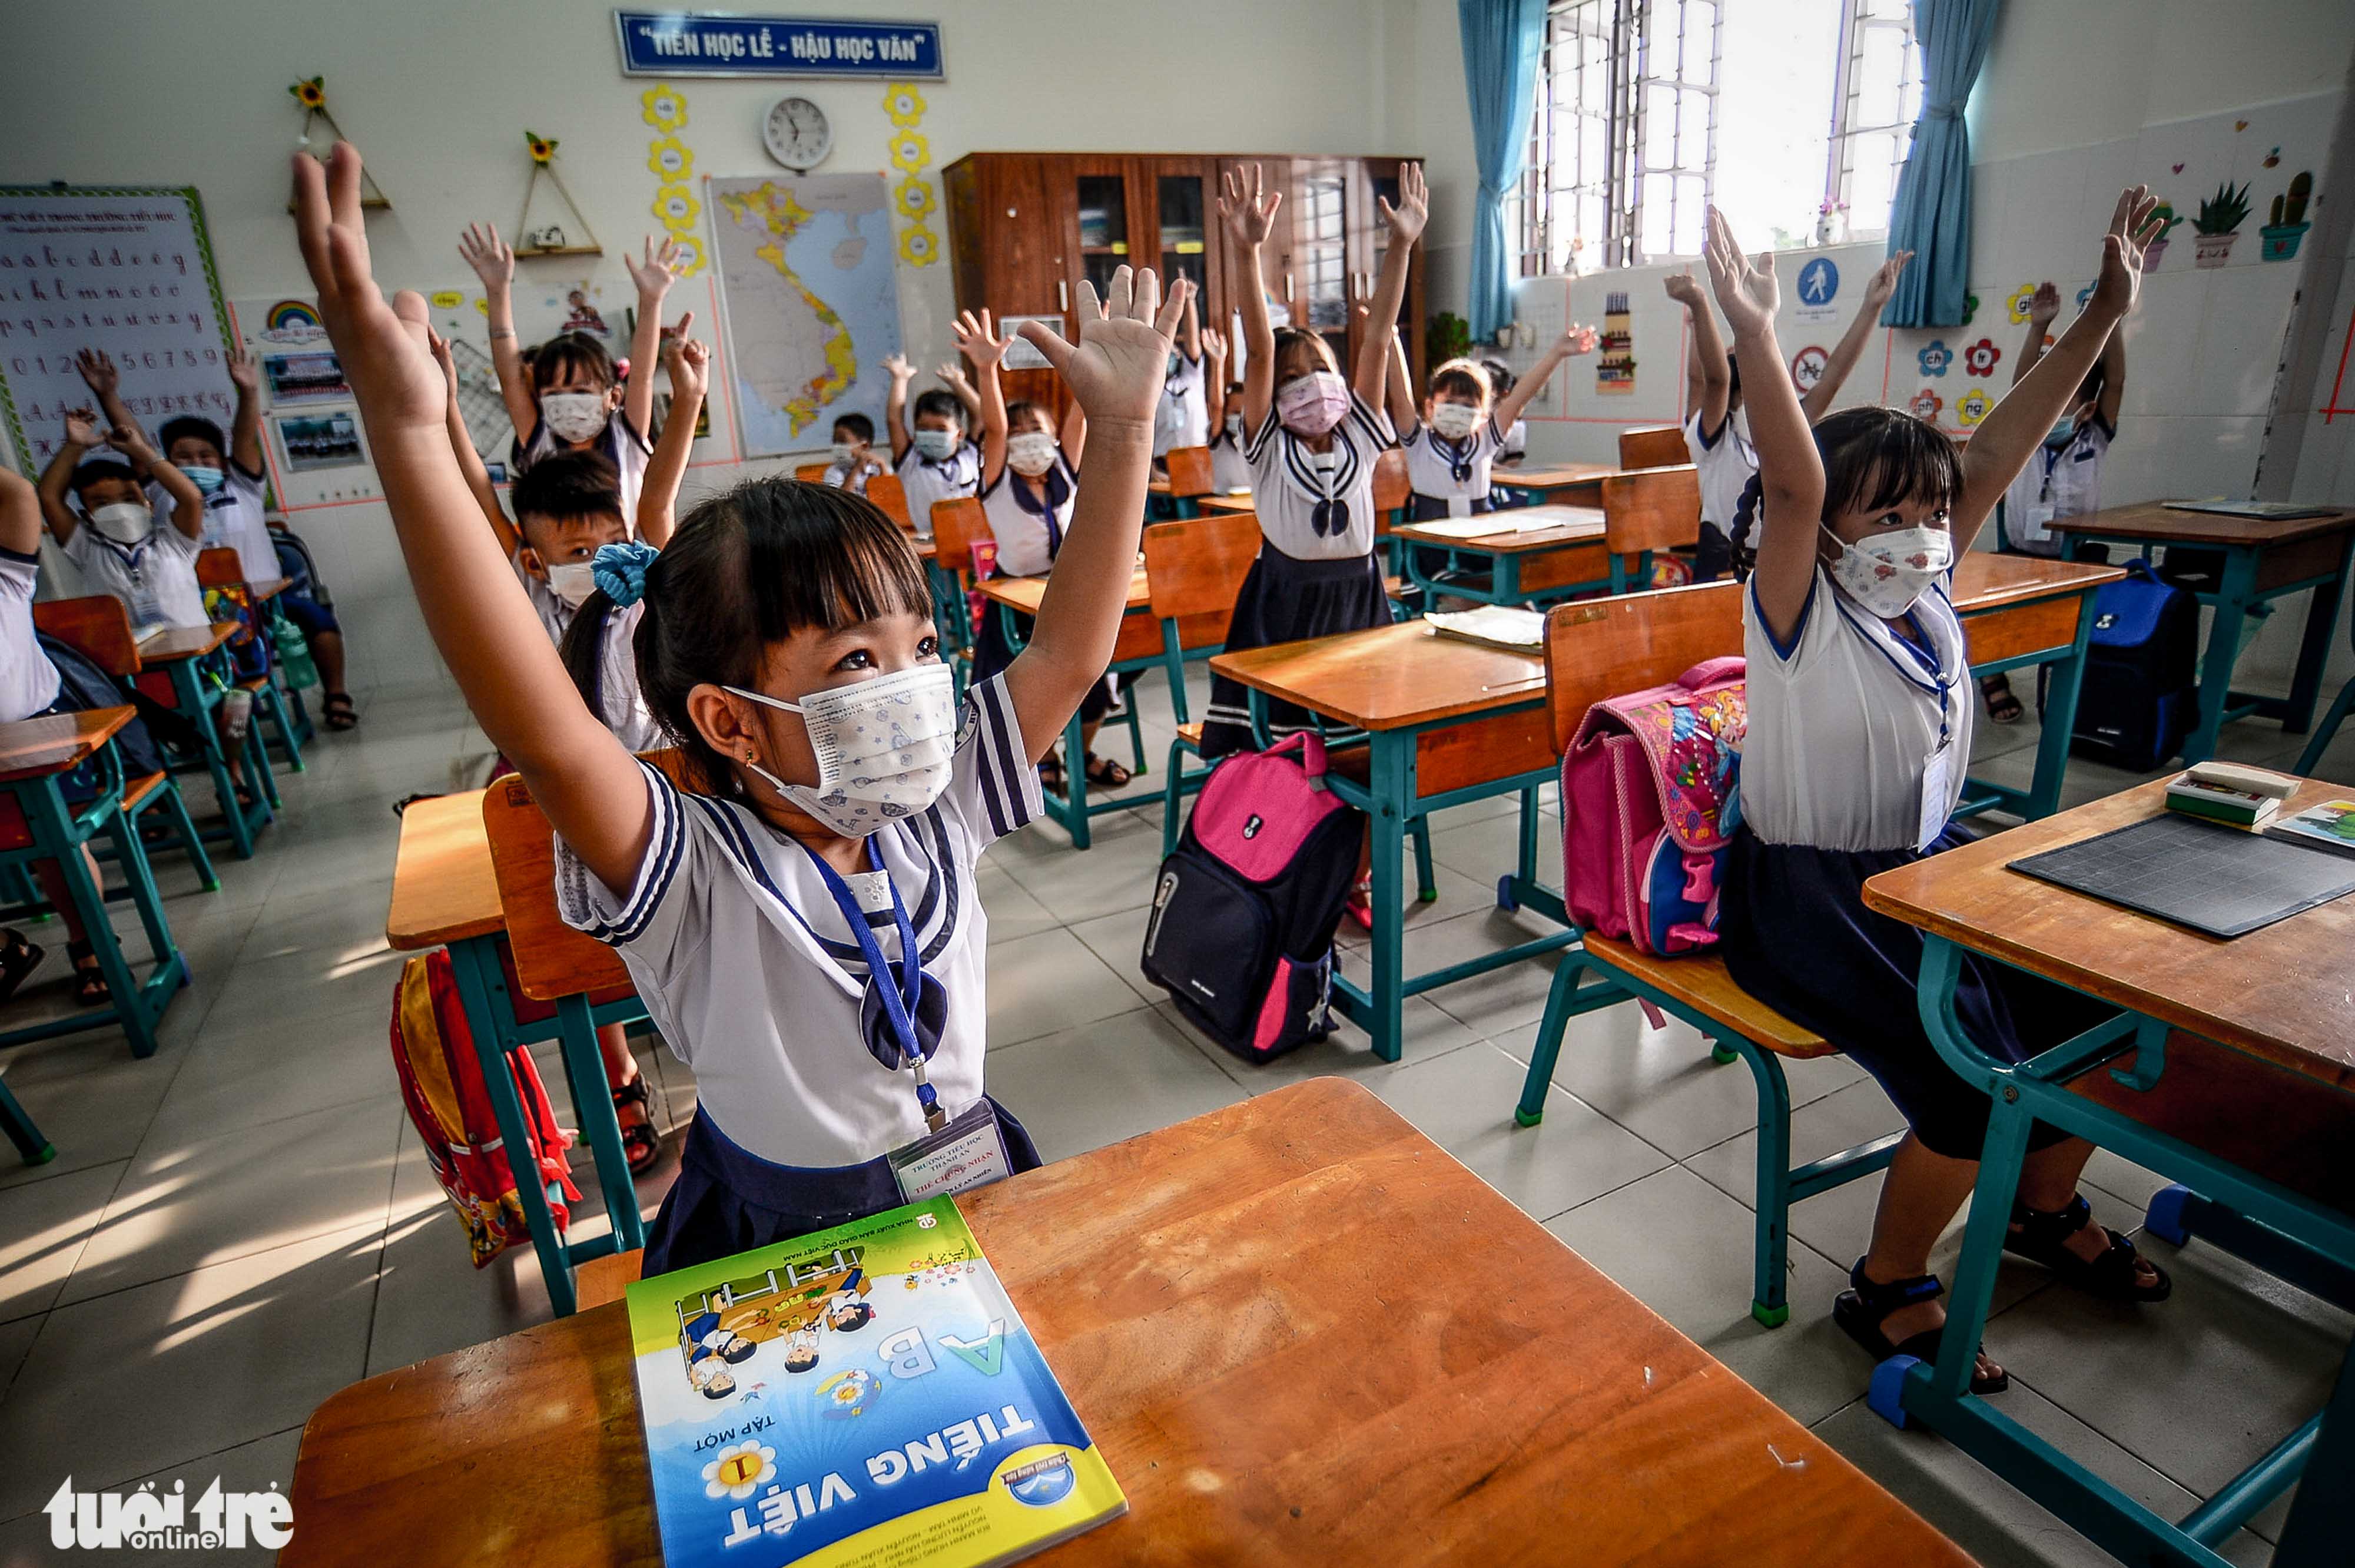 Students return to class on a trial basis on Thach An Island in Can Gio District, Ho Chi Minh City, October 20, 2021 following months of remote learning. Photo: Quang Dinh / Tuoi Tre